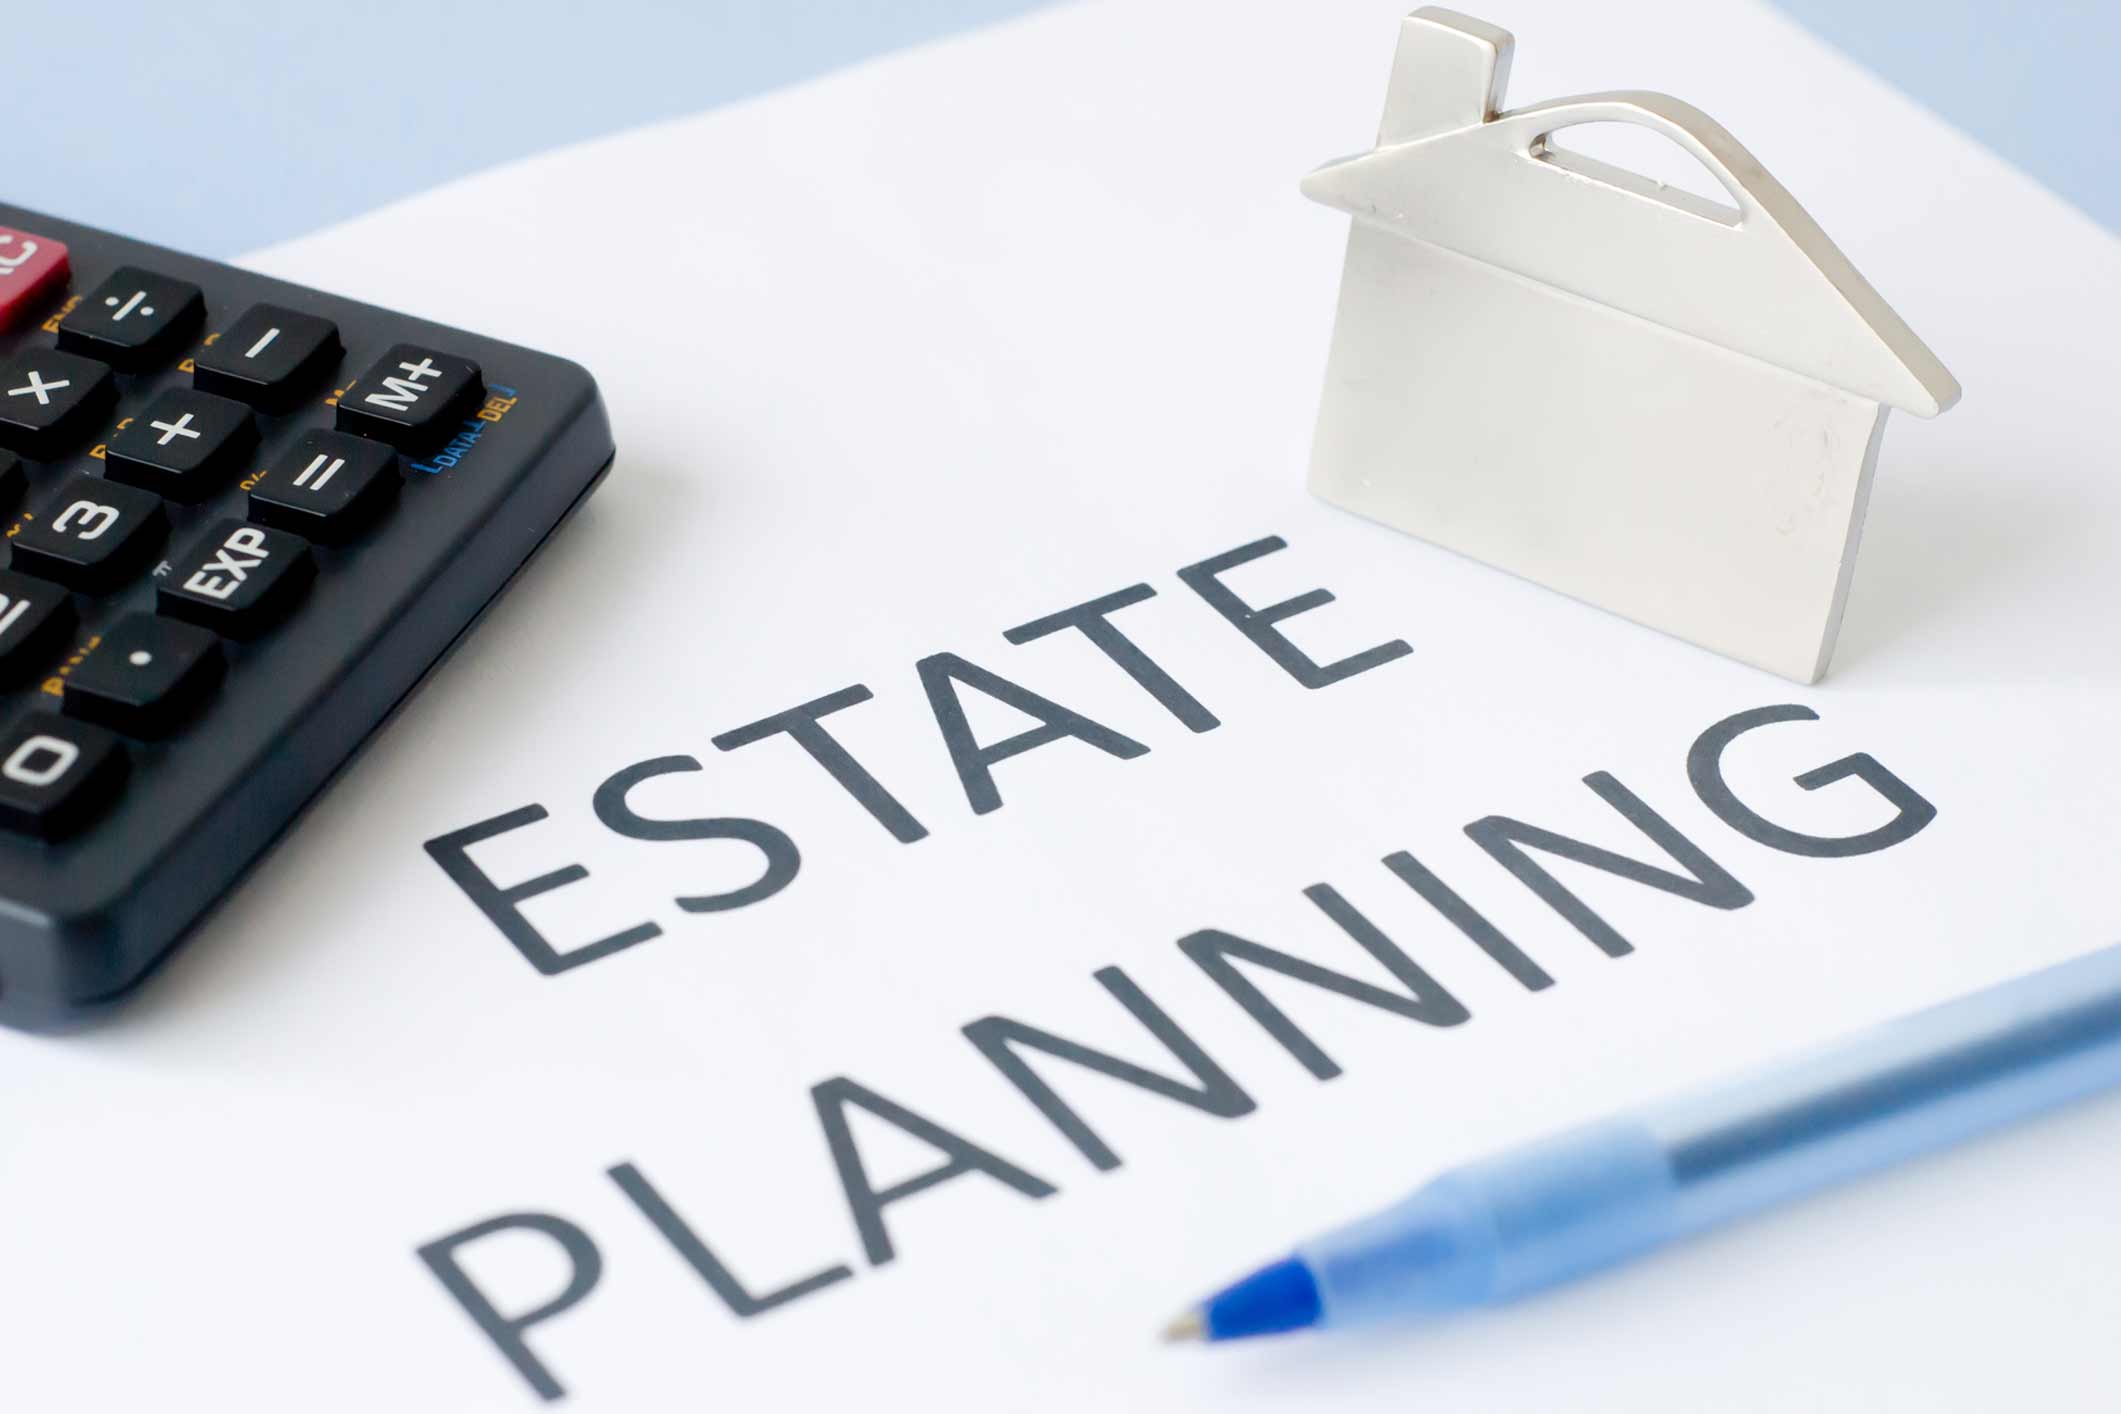 Prior Proper Estate Planning Eases Stress of the Unknown